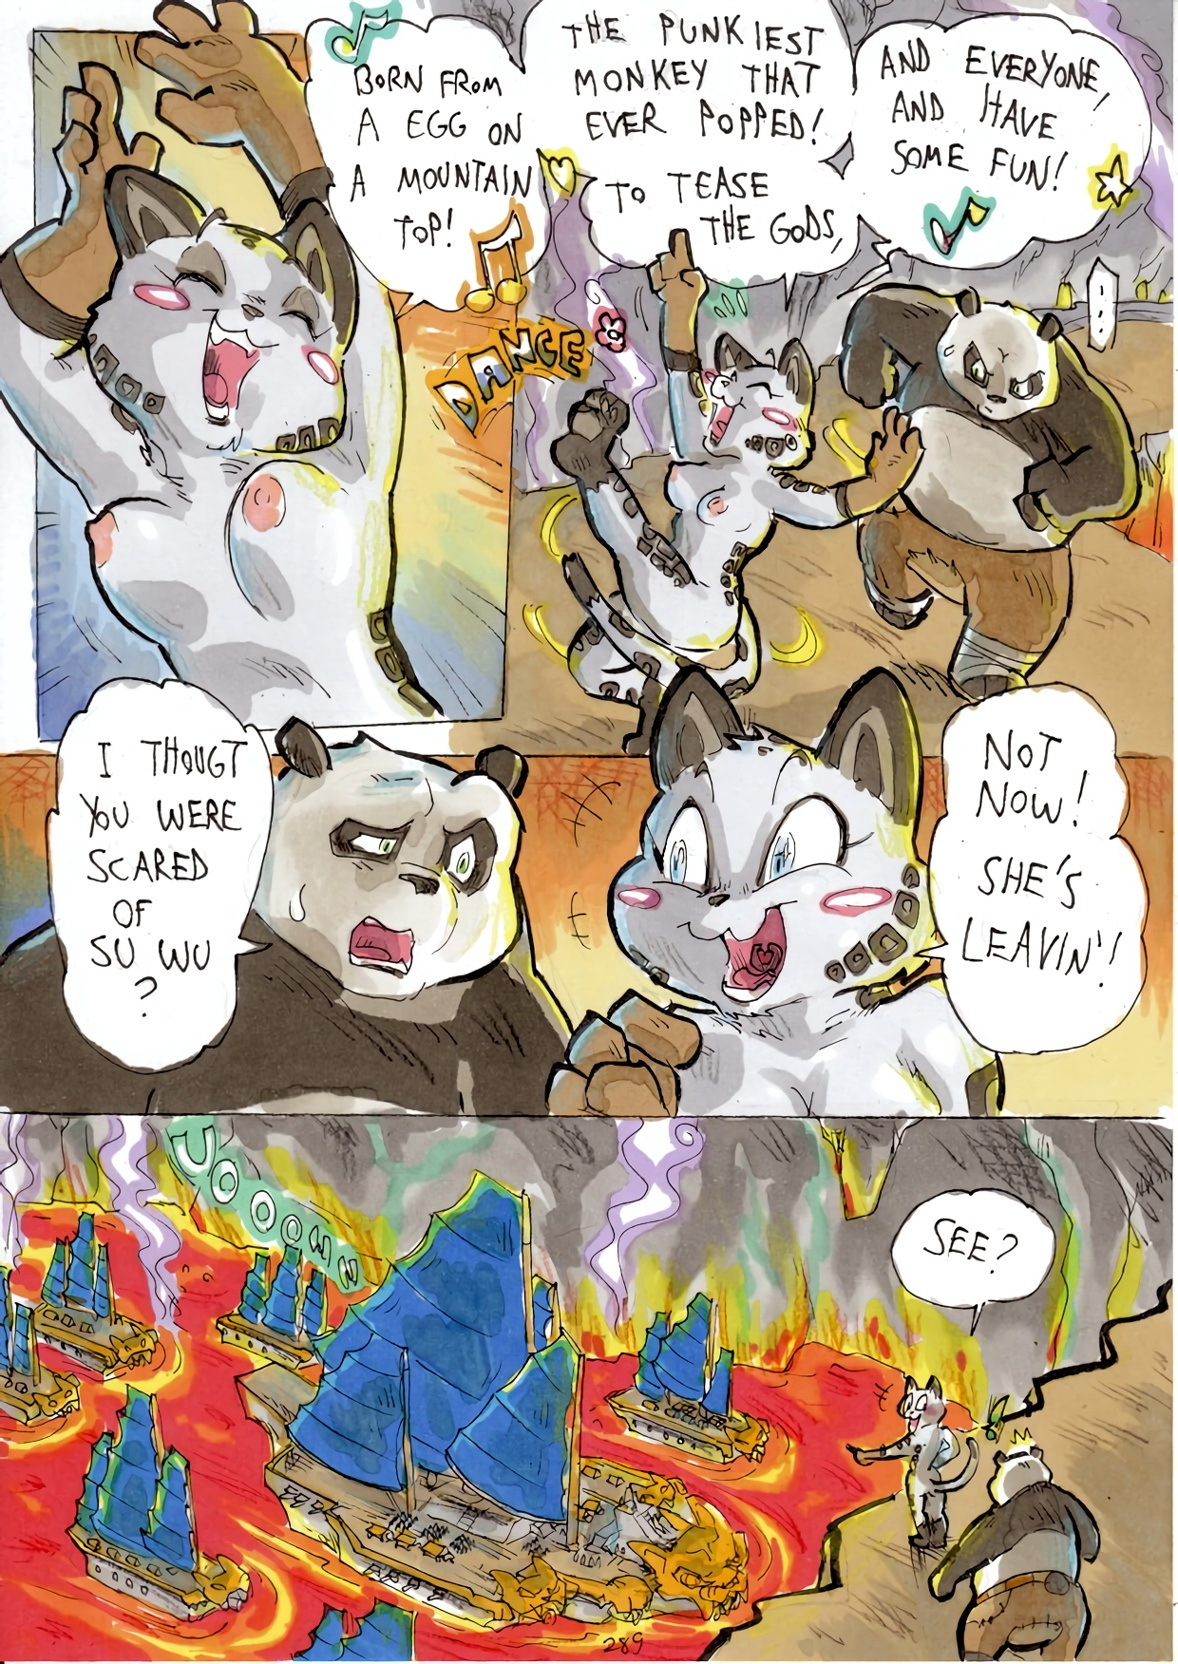 Better Late than Never 2 - Page 144